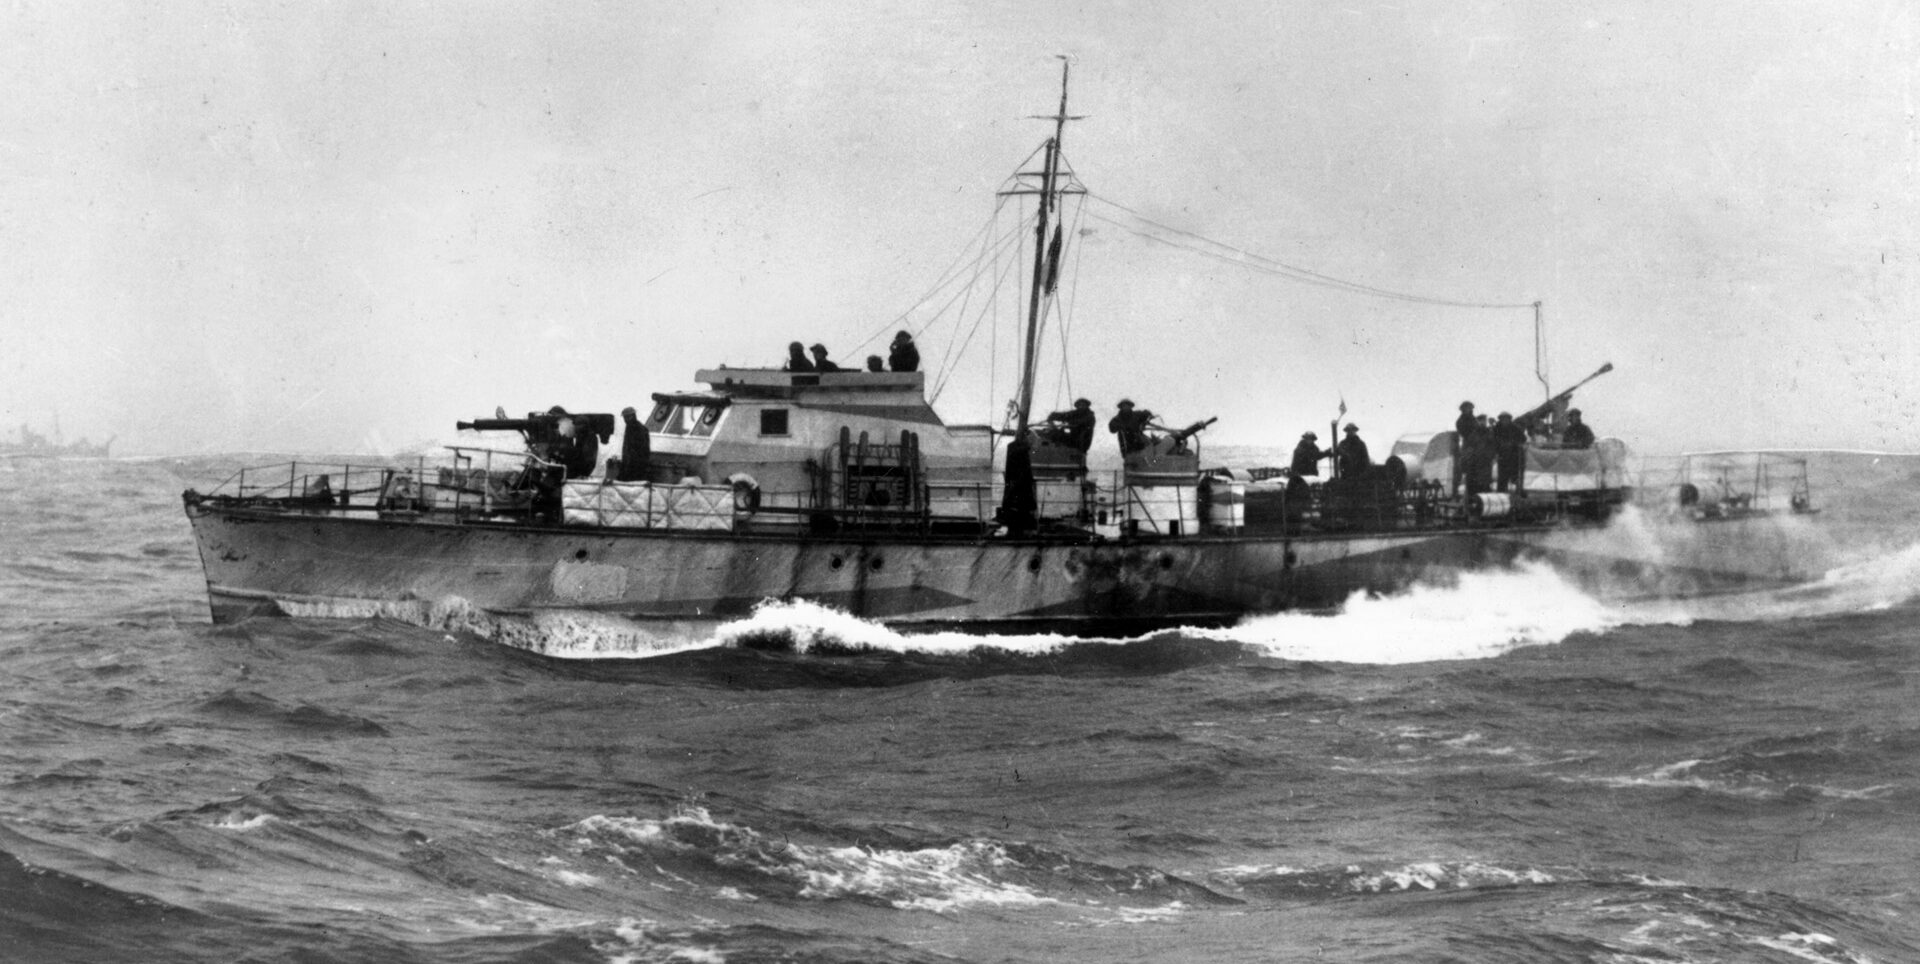 Motor gunboat MGB 314, headquarters ship for Commander Ryder and Lt. Col. Newman, was badly damaged by shore batteries and had to be scuttled.